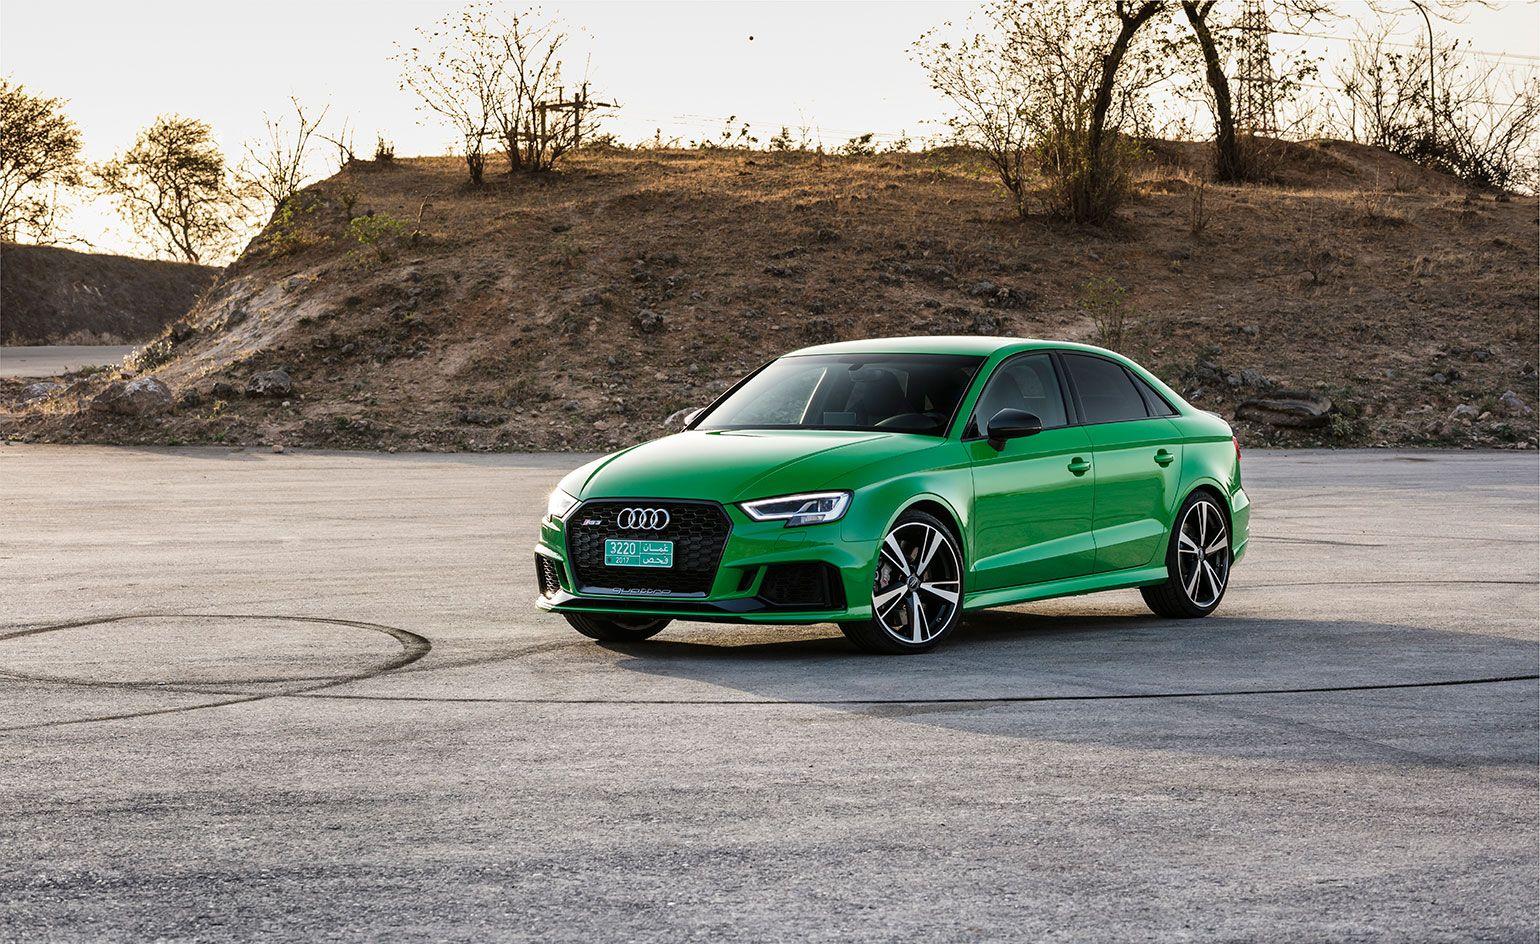 The launch of the new Audi RS3. Wallpaper*